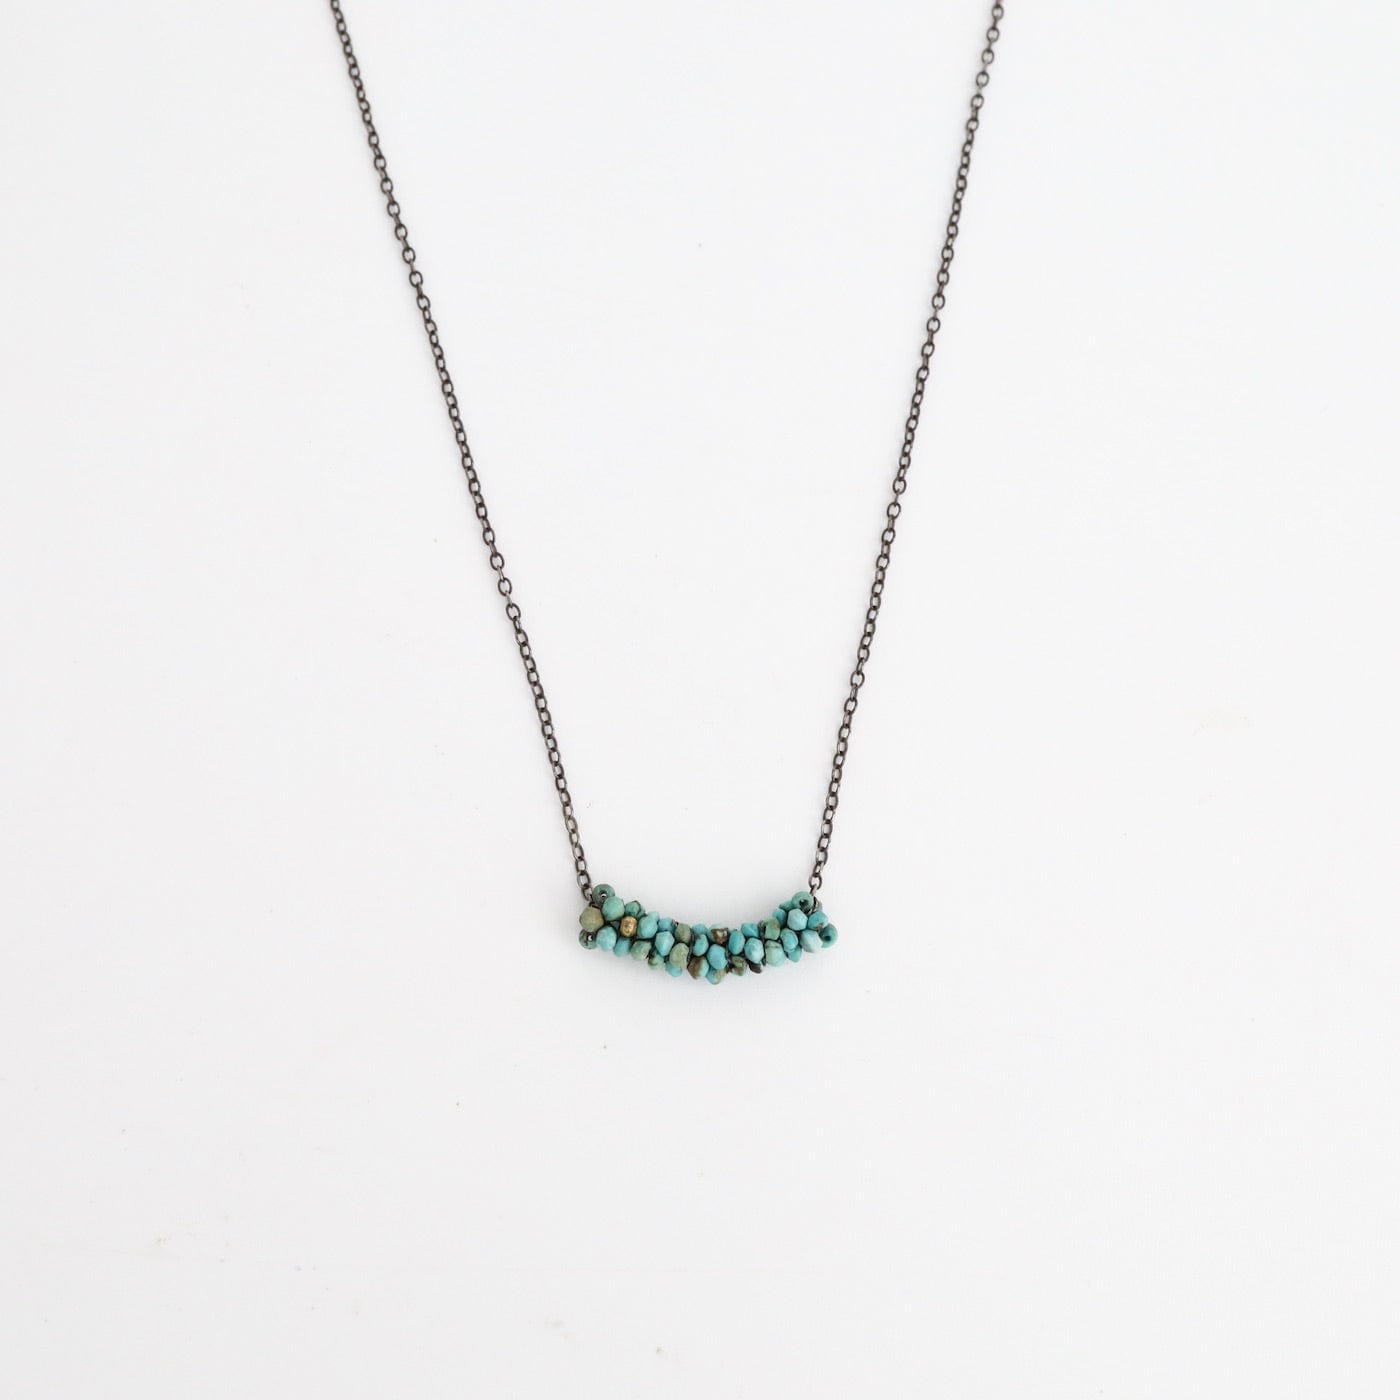 NKL-JM Hand Stitched Turquoise Necklace